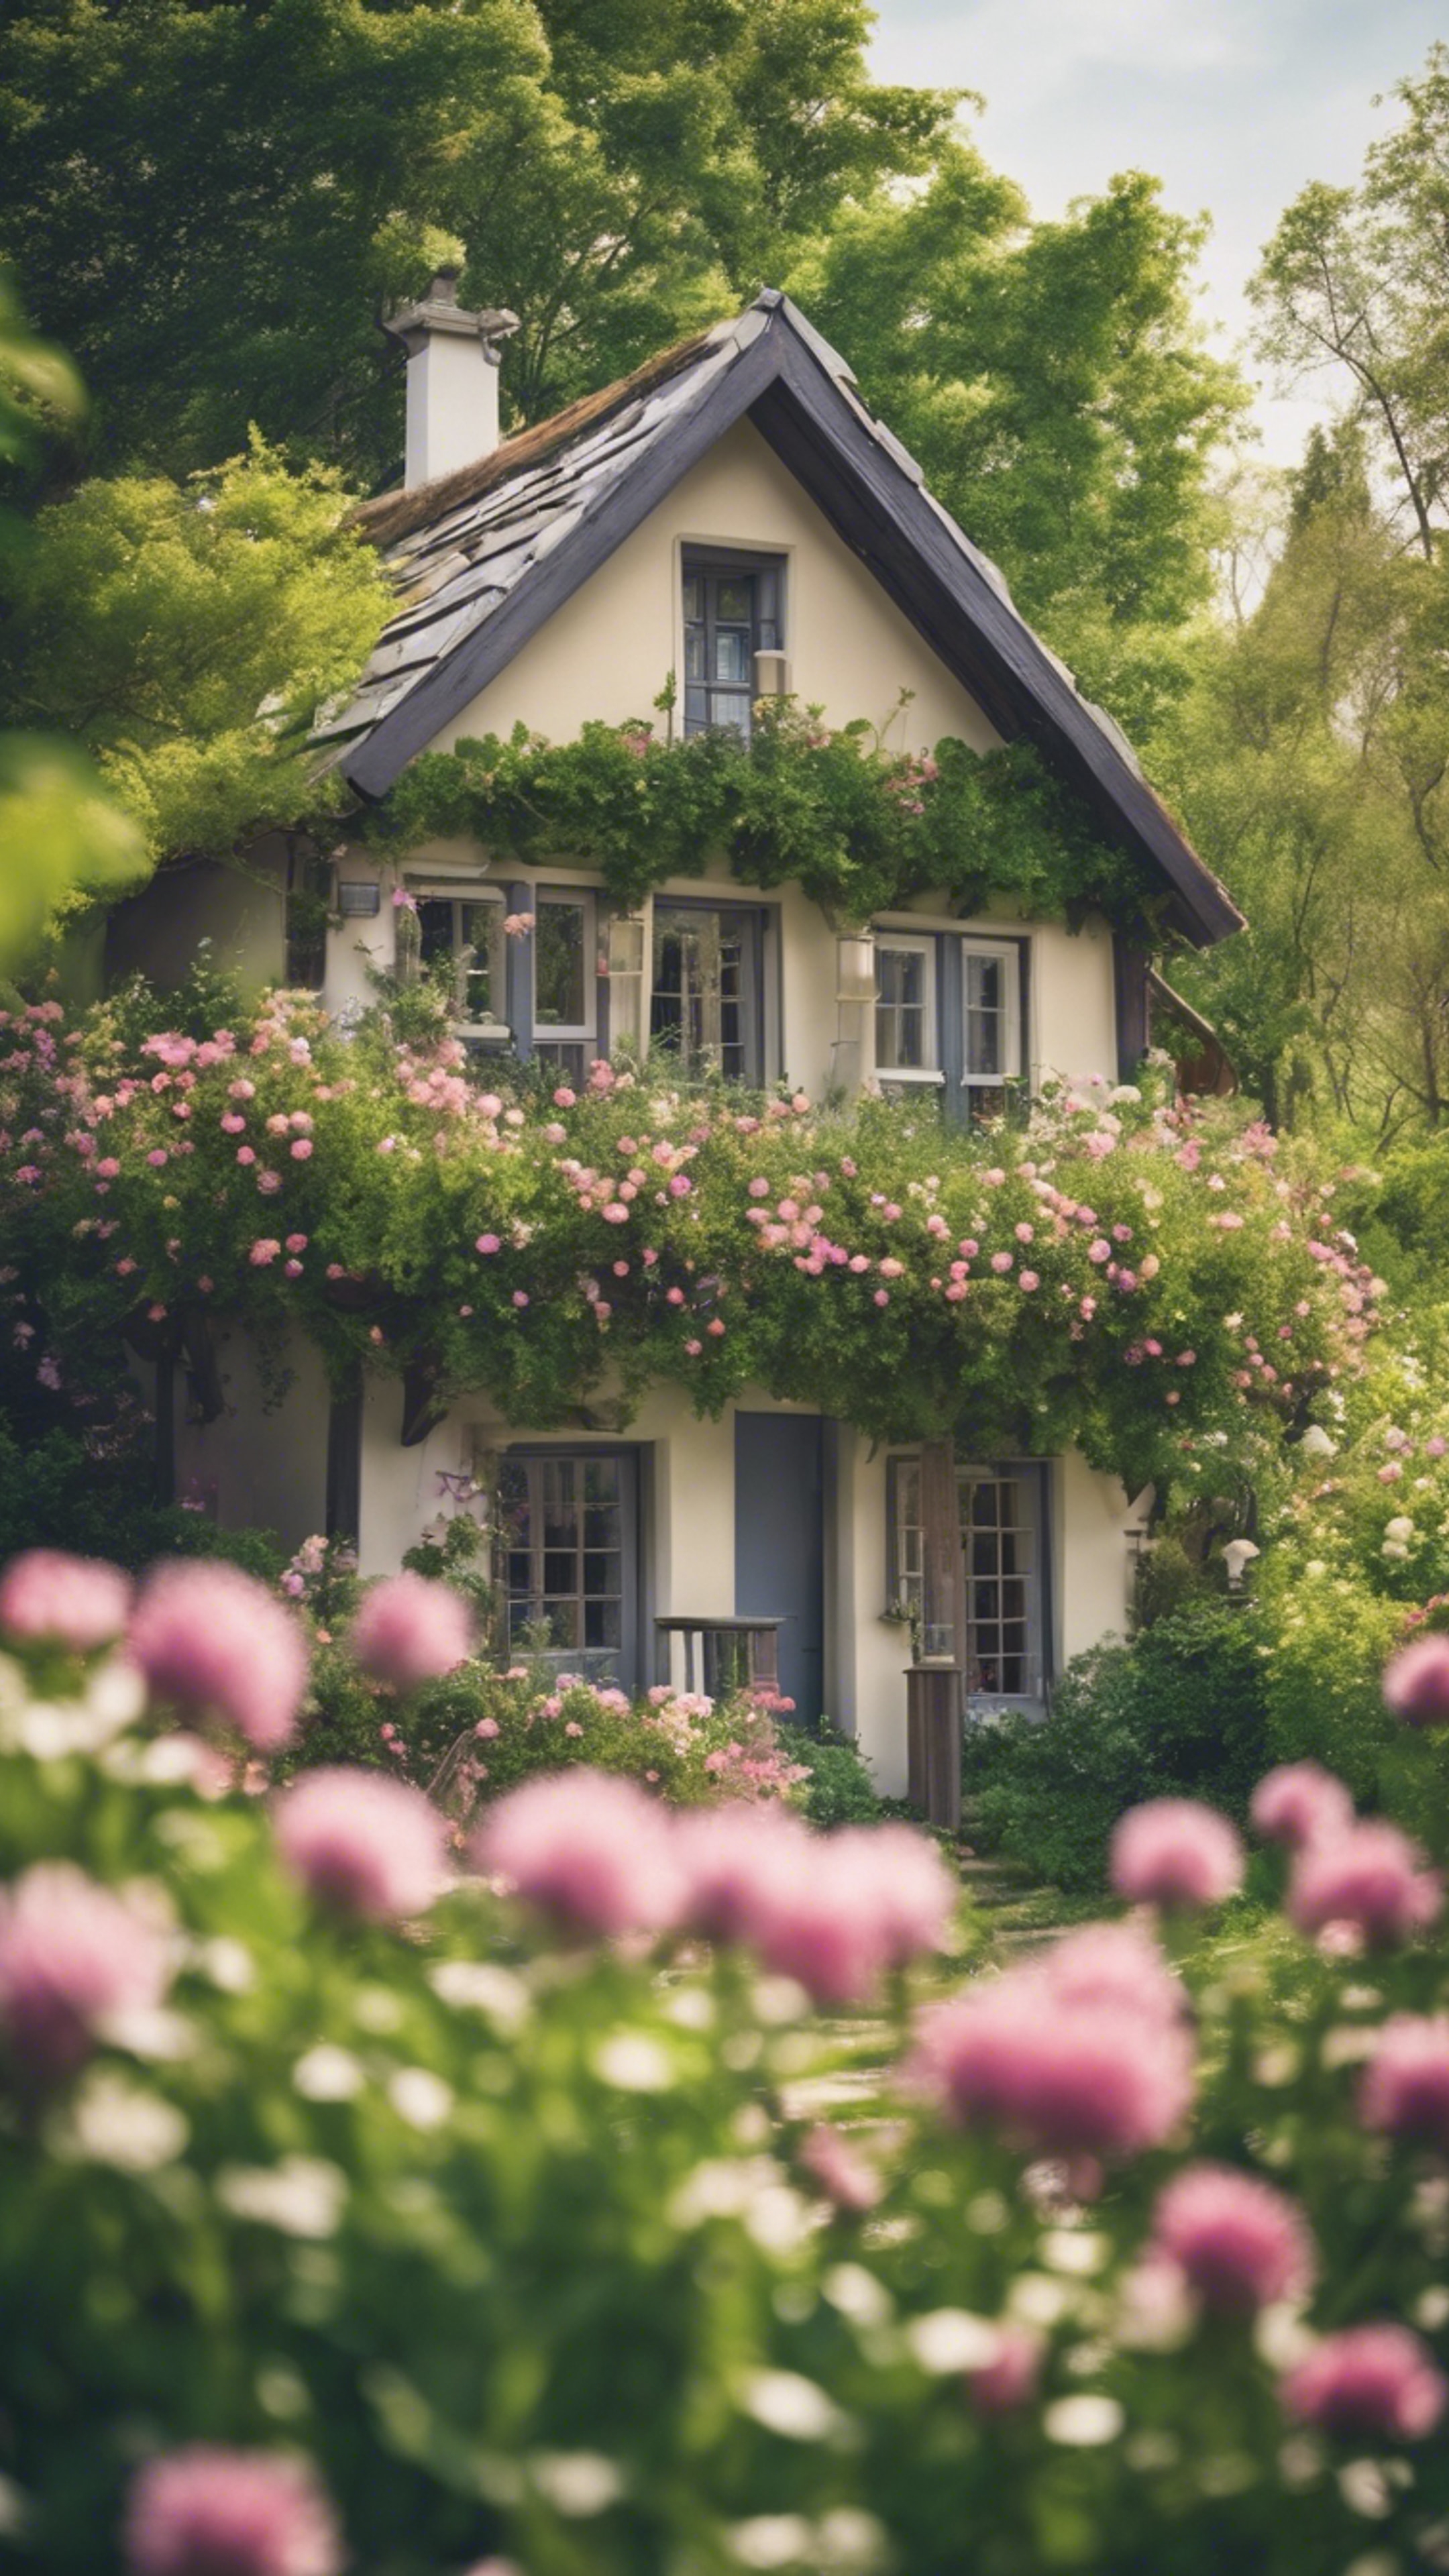 A picturesque scene of a quaint little cottage surrounded by a burst of spring flowers and new green foliage. Wallpaper[ad9cdb560dce44d082cc]